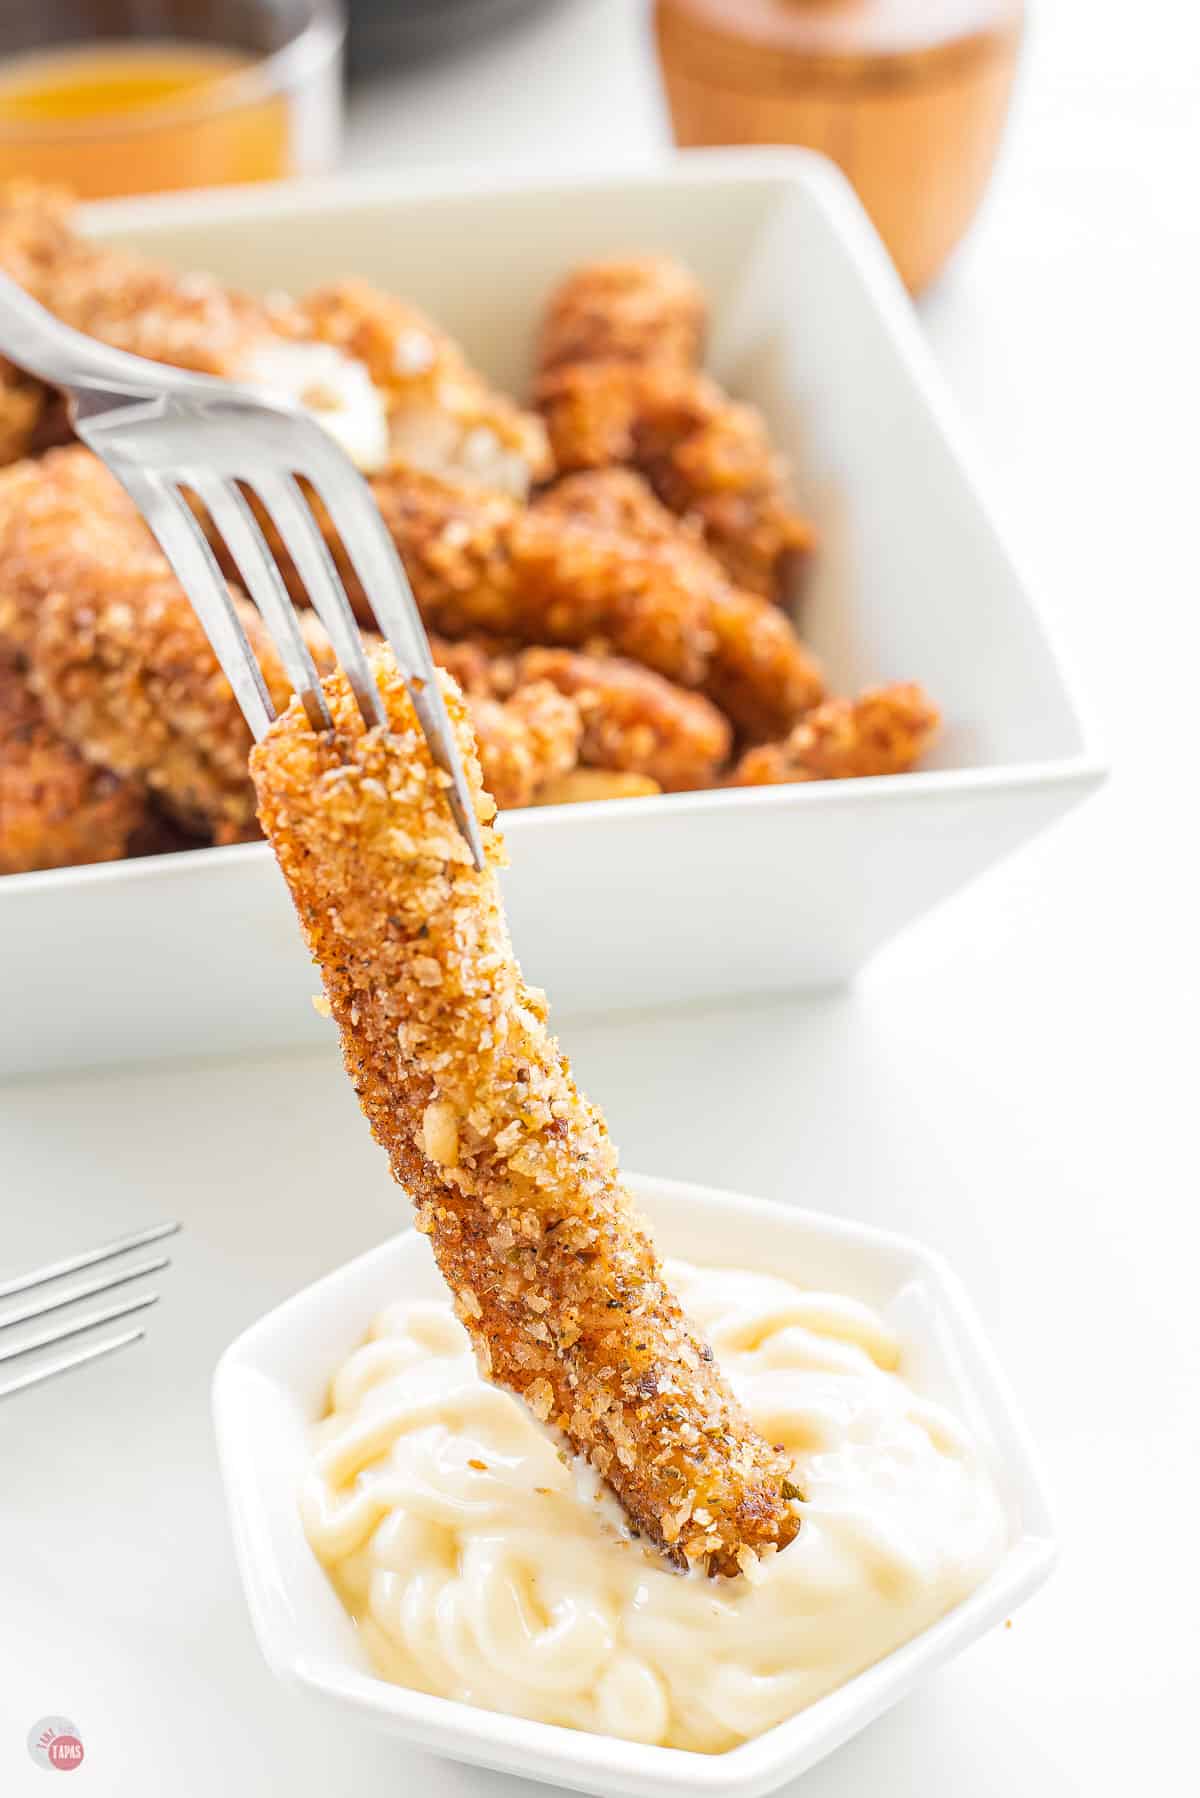 fish stick dipping in sauce